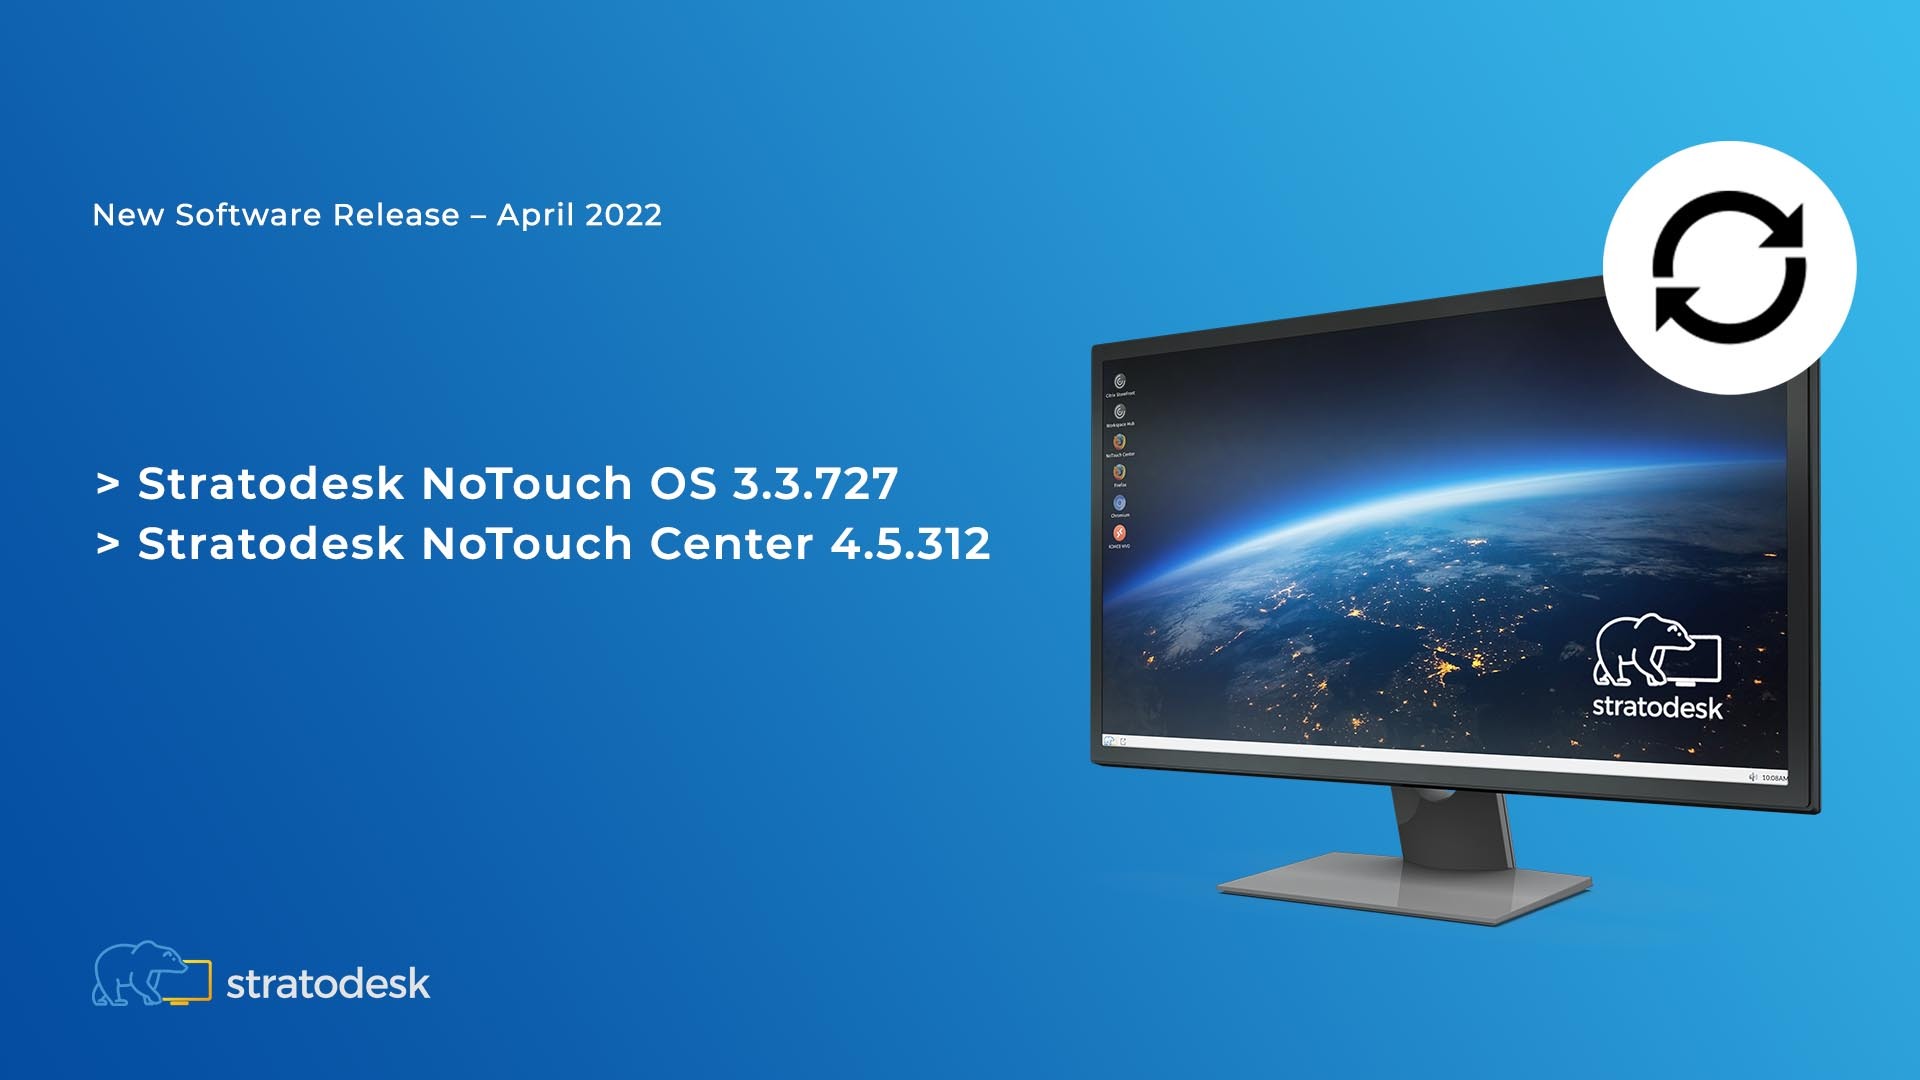 Introducing Stratodesk NoTouch 3.3.727 & NoTouch Center 4.5.312